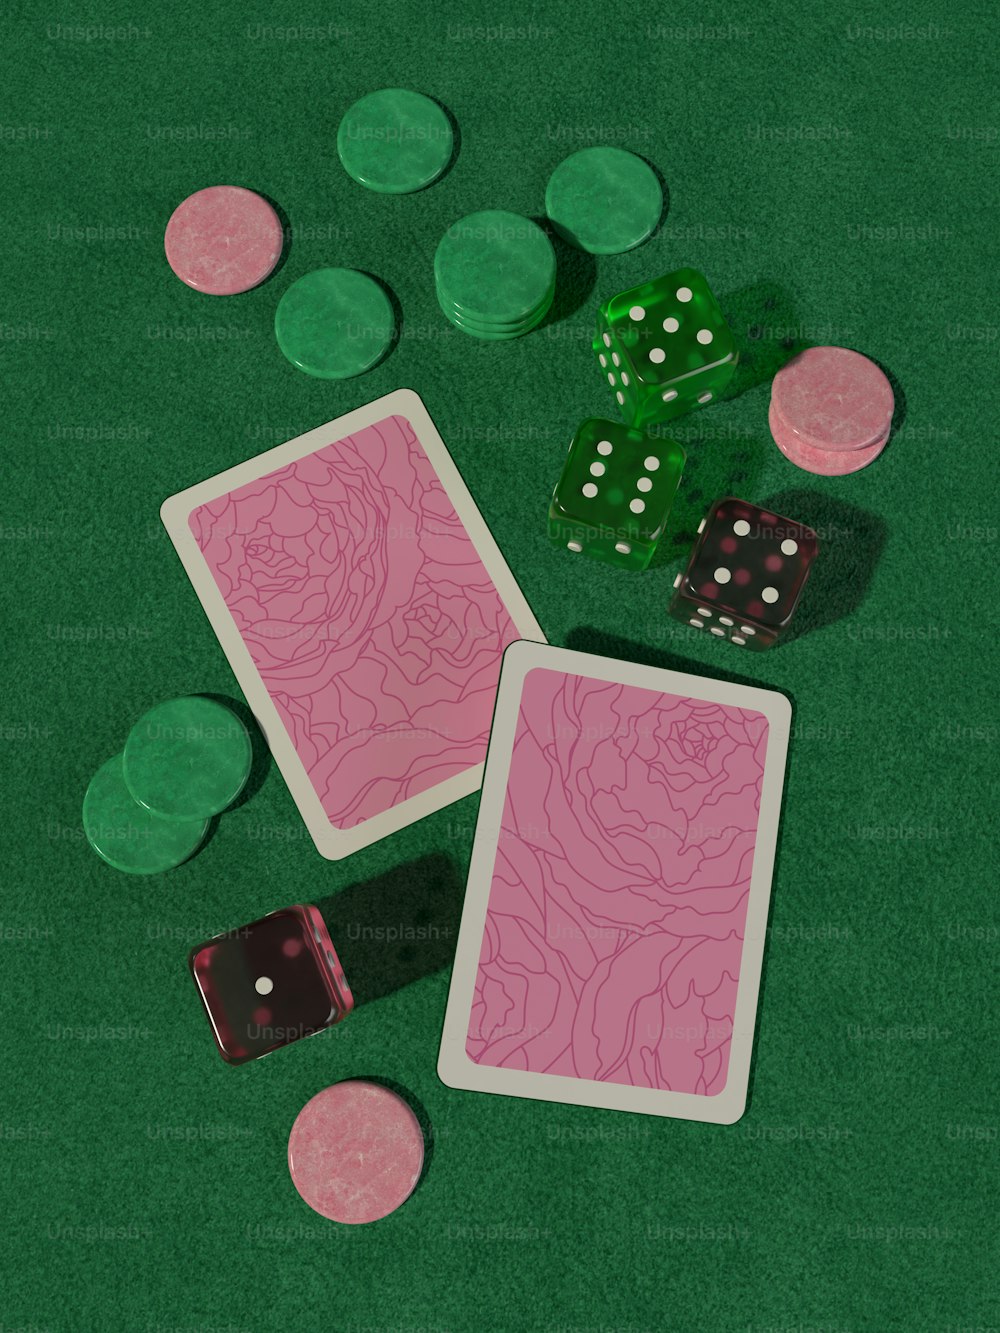 two playing cards and two dice on a green table